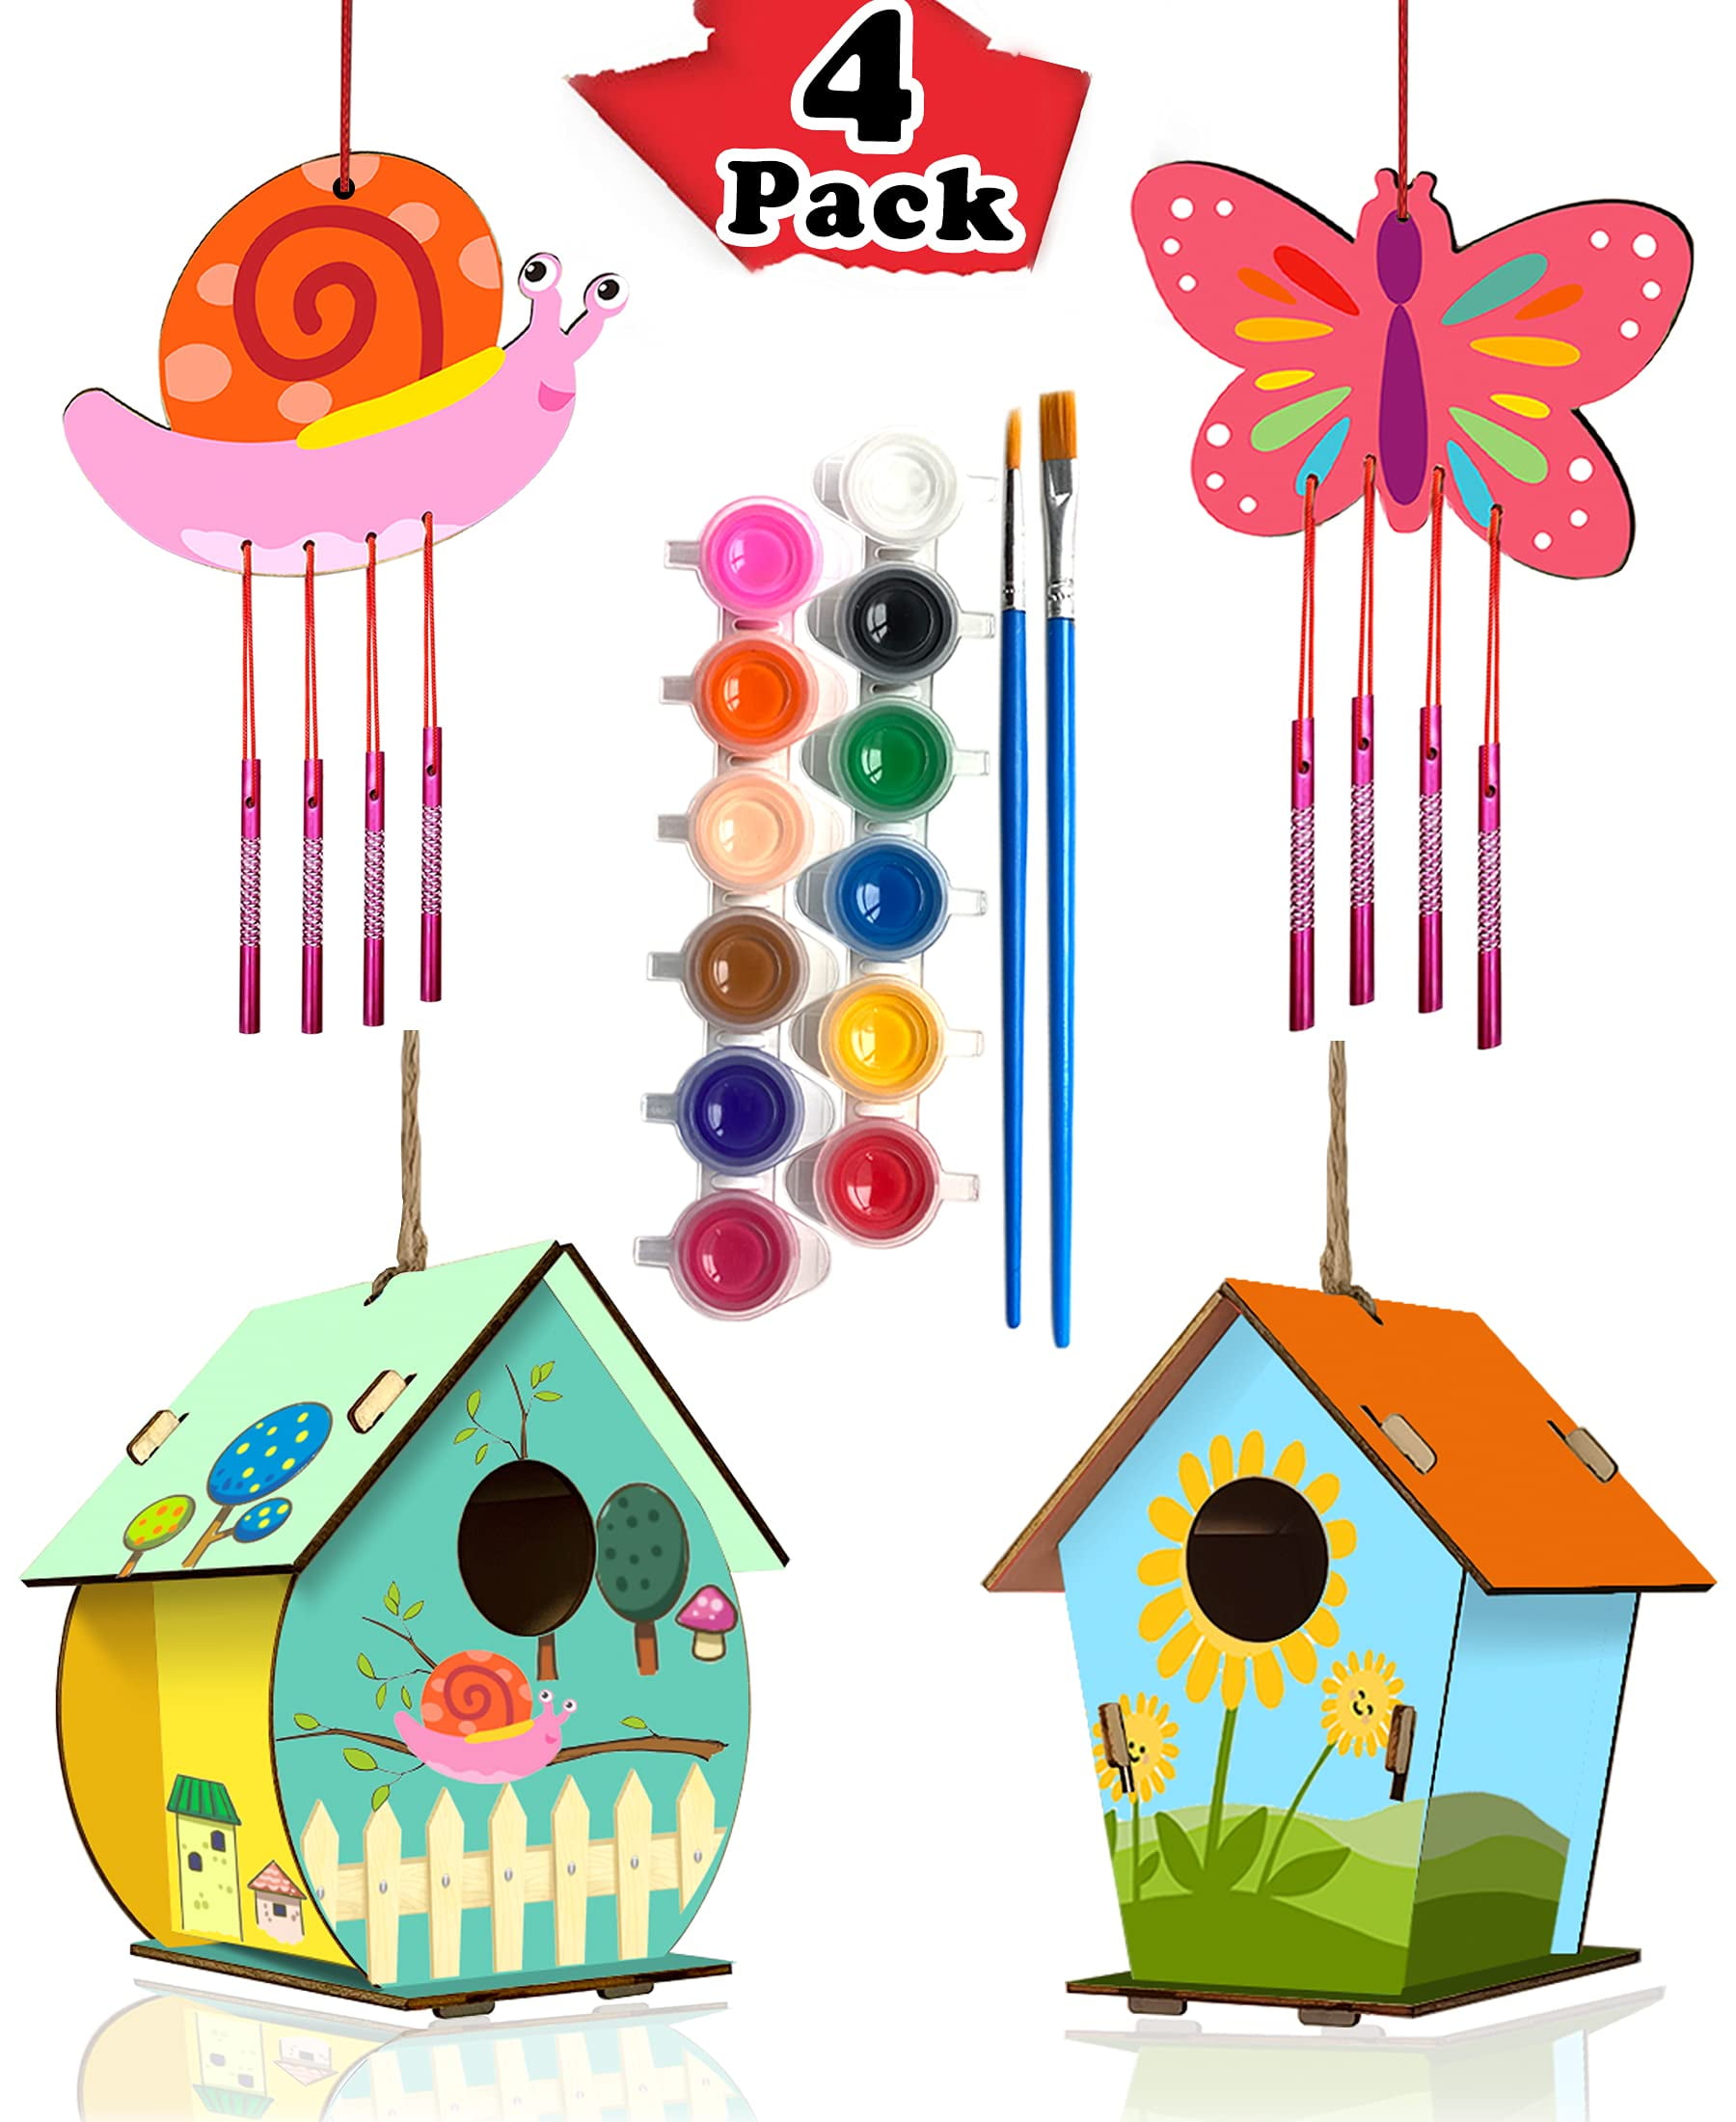 3-Pack DIY Wind Chime Kits- Arts and Crafts for Boys Girls Kids